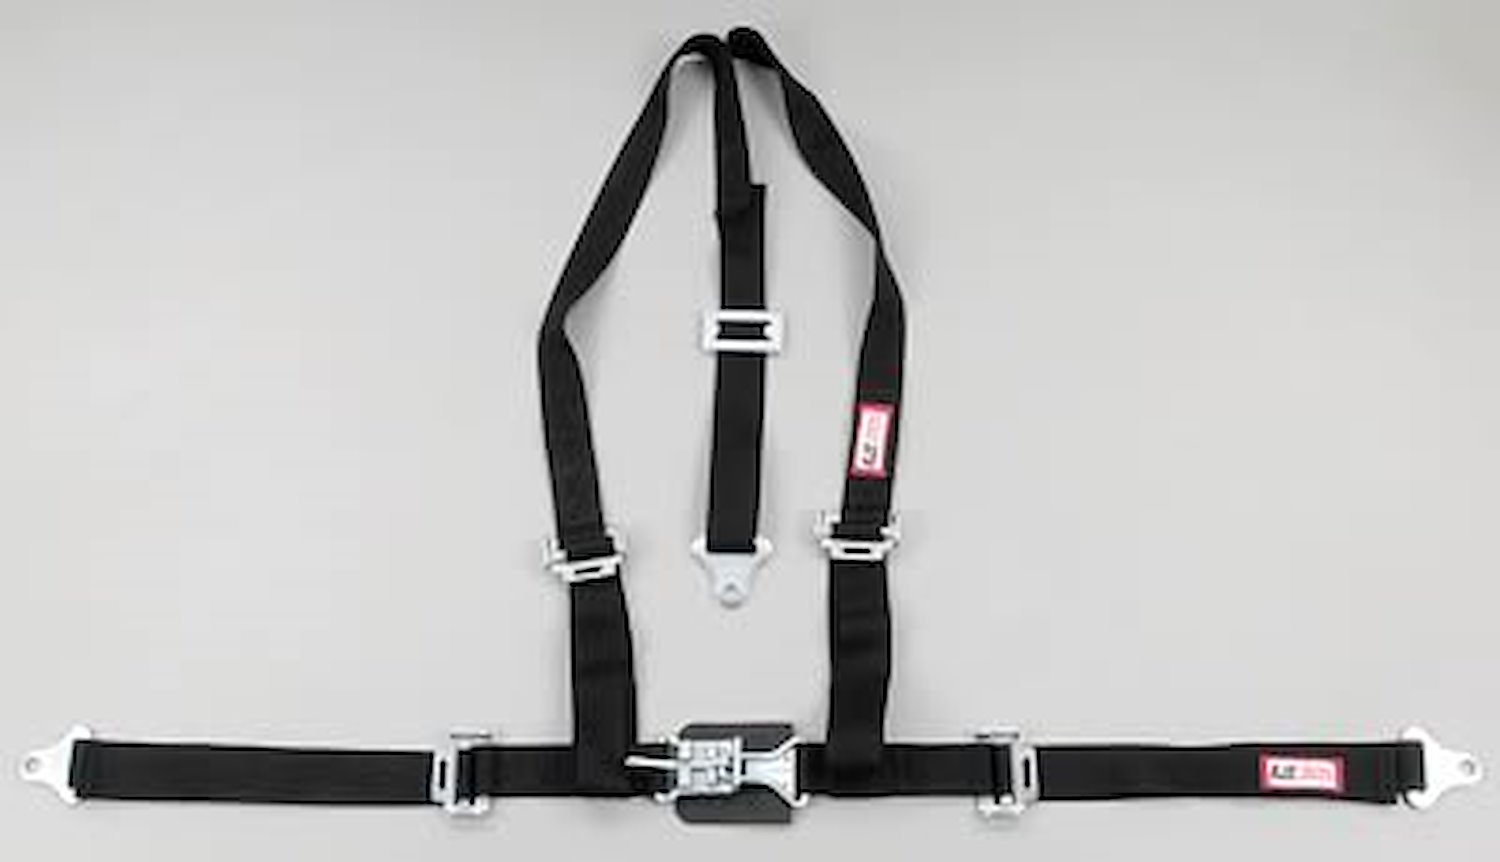 NON-SFI L&L HARNESS 3 PULL UP Lap Belt SNAP SEWN IN 2 S.H. Individual ROLL BAR Mount WRAP/BOLT BLUE